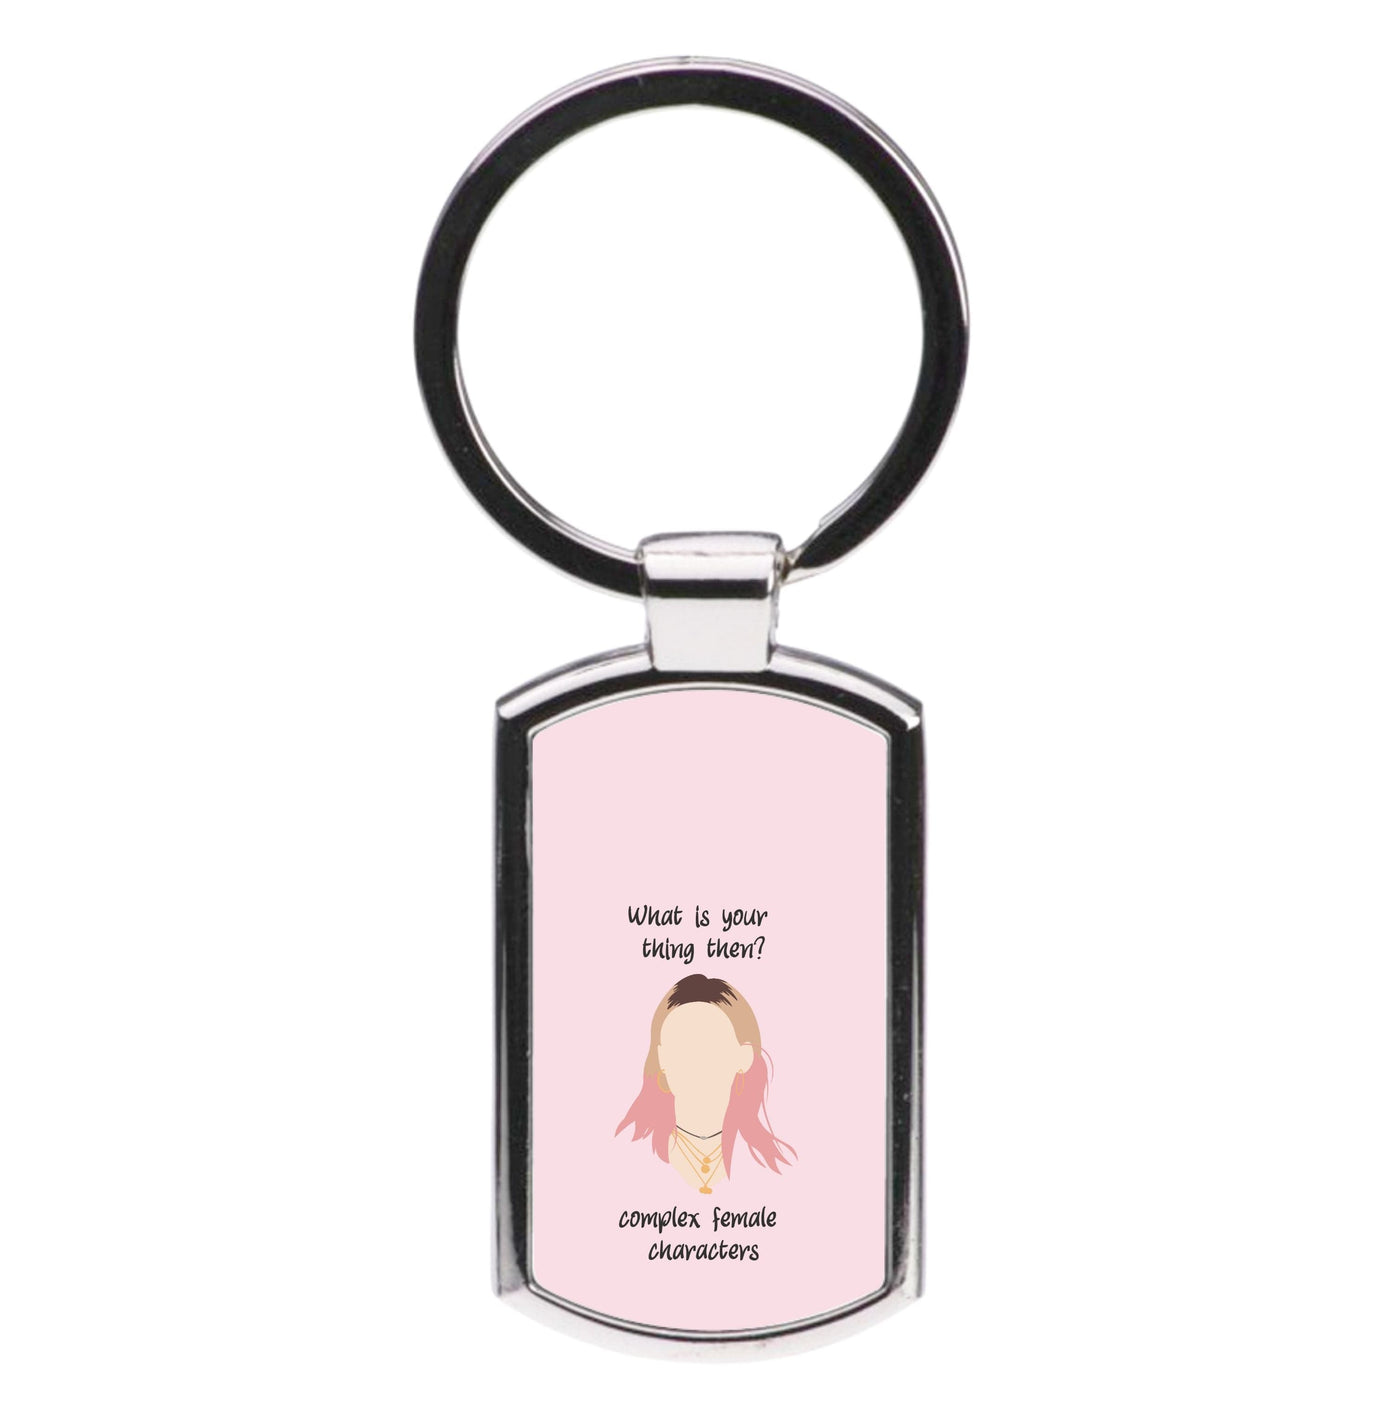 Complex Female Characters - Sex Education Luxury Keyring